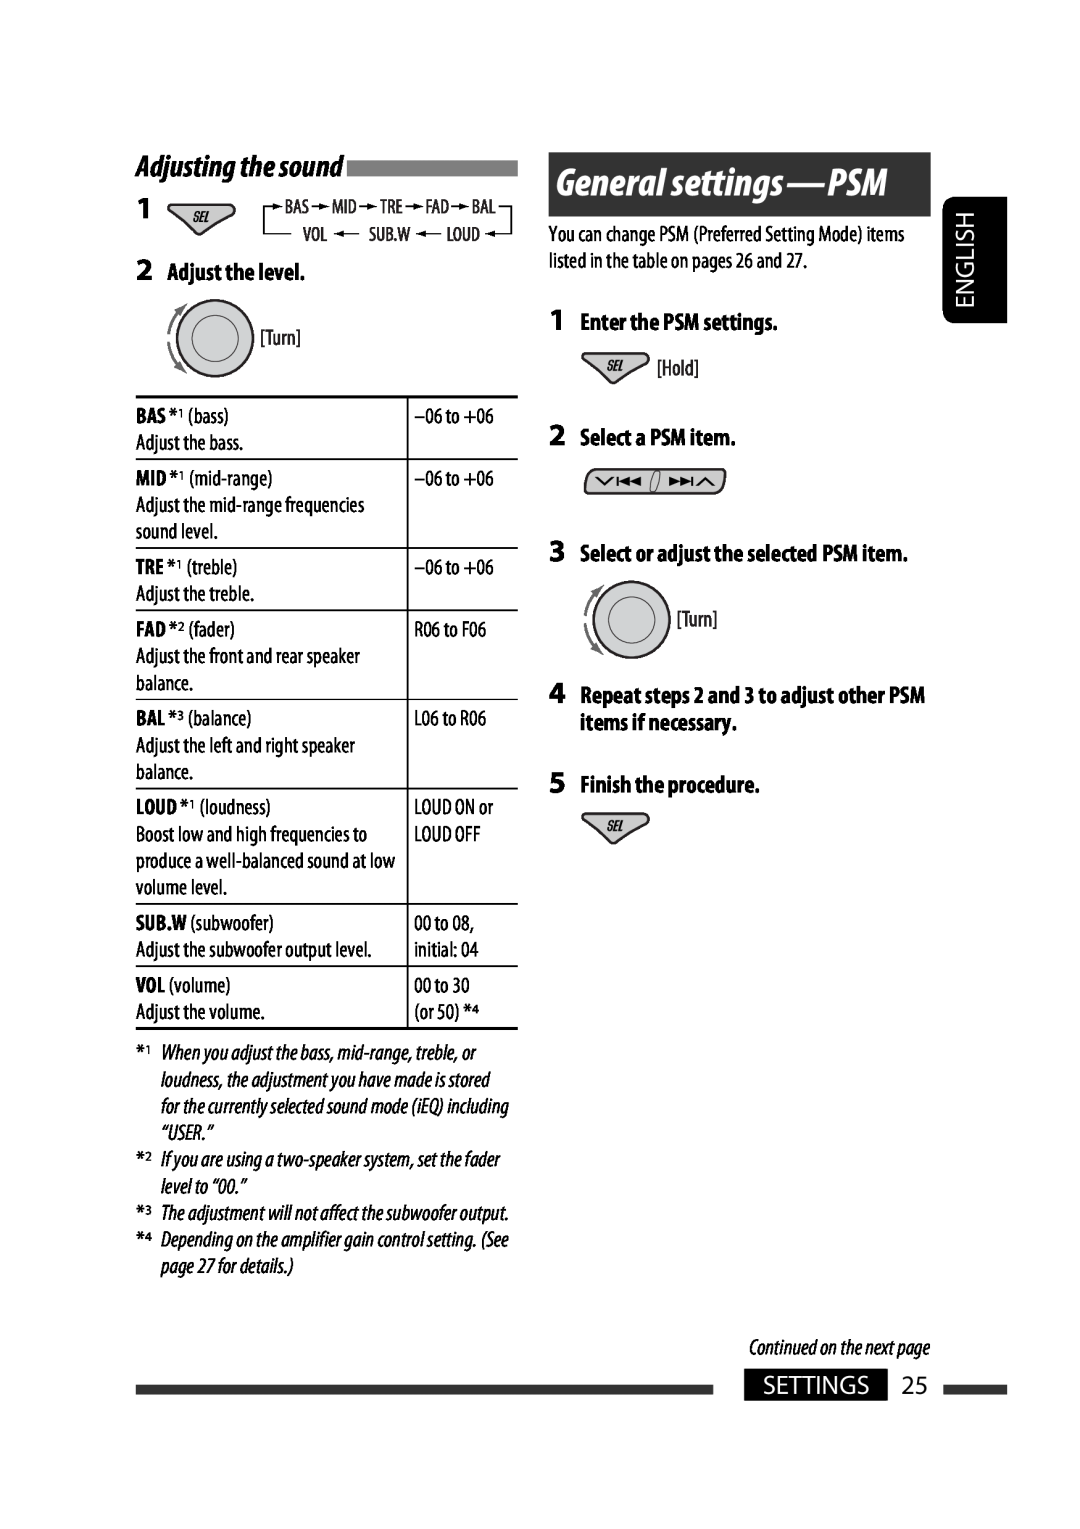 JVC KD-G731 manual General settings-PSM, Settings, Adjusting the sound, Adjust the level, Enter the PSM settings 